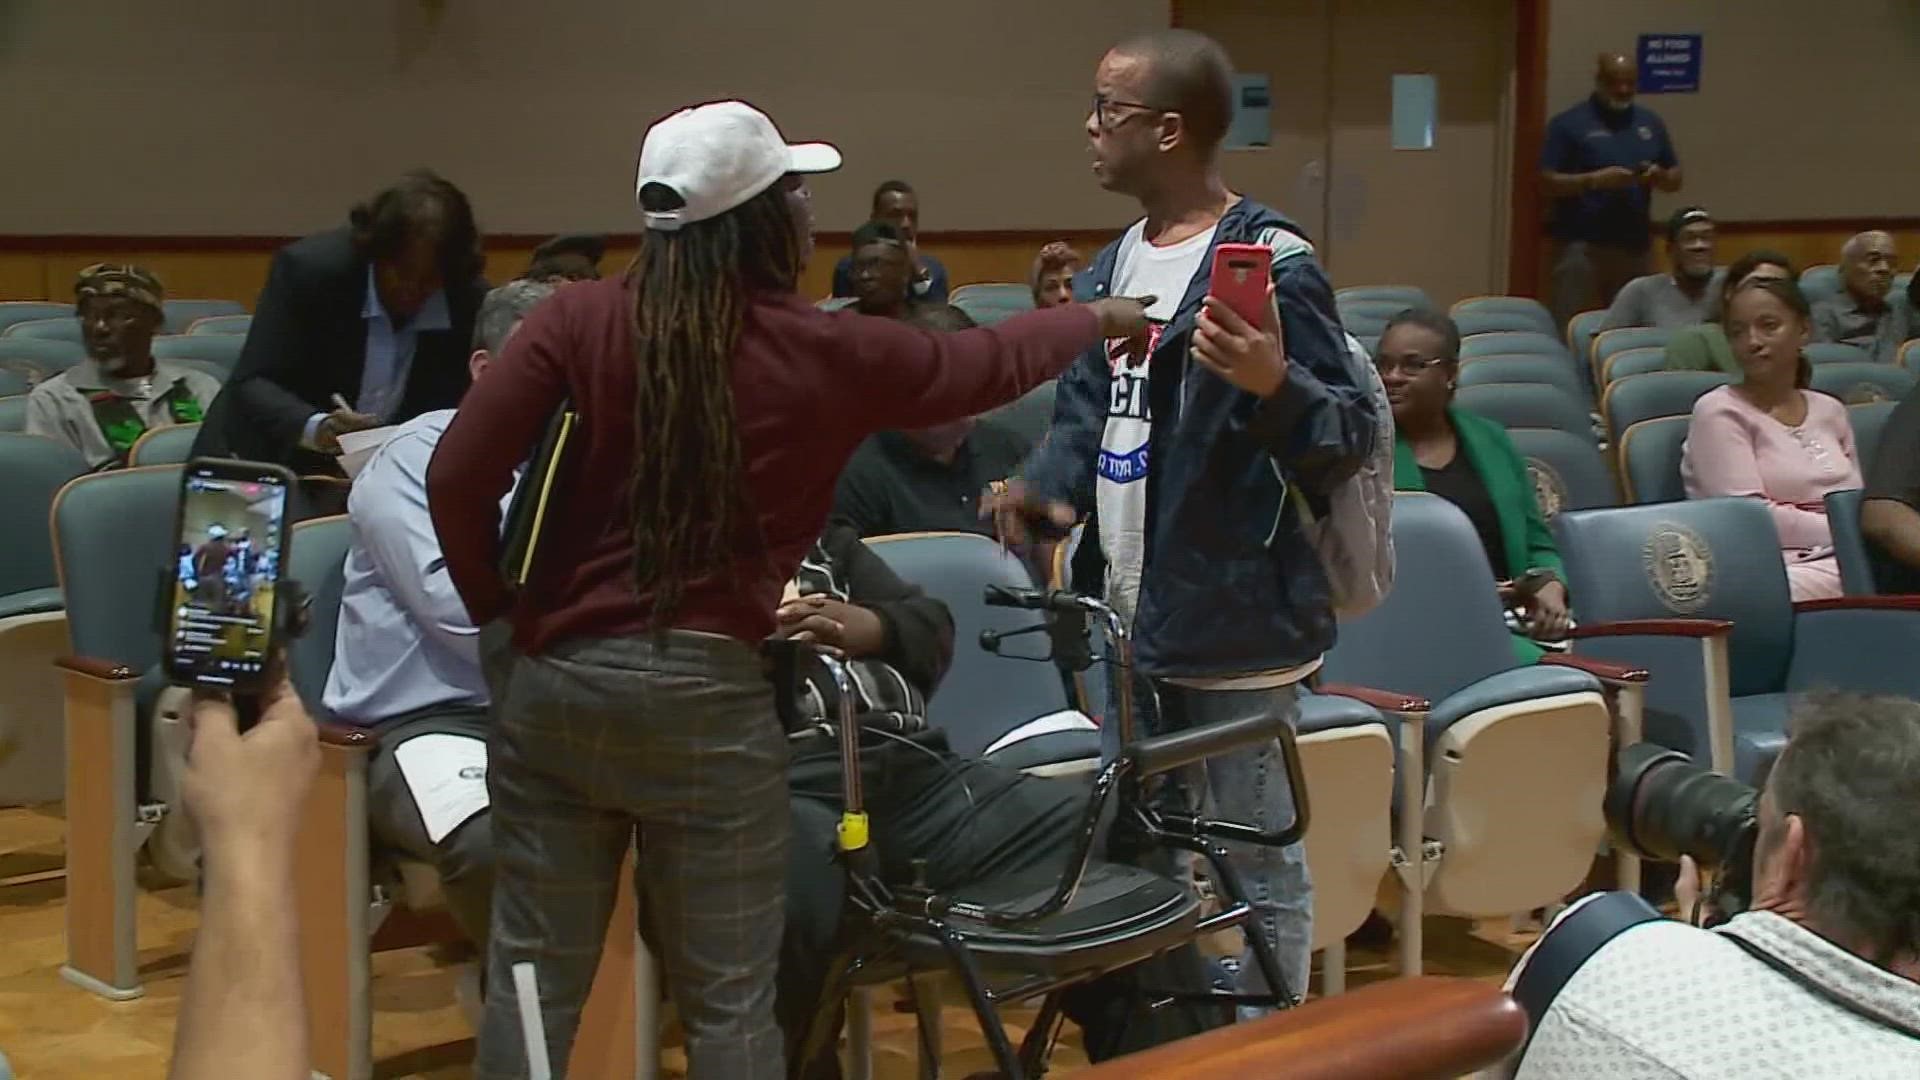 Several community members were visibly frustrated, many of them shouting over each other and councilmembers, during NOLA city council meeting on crime.